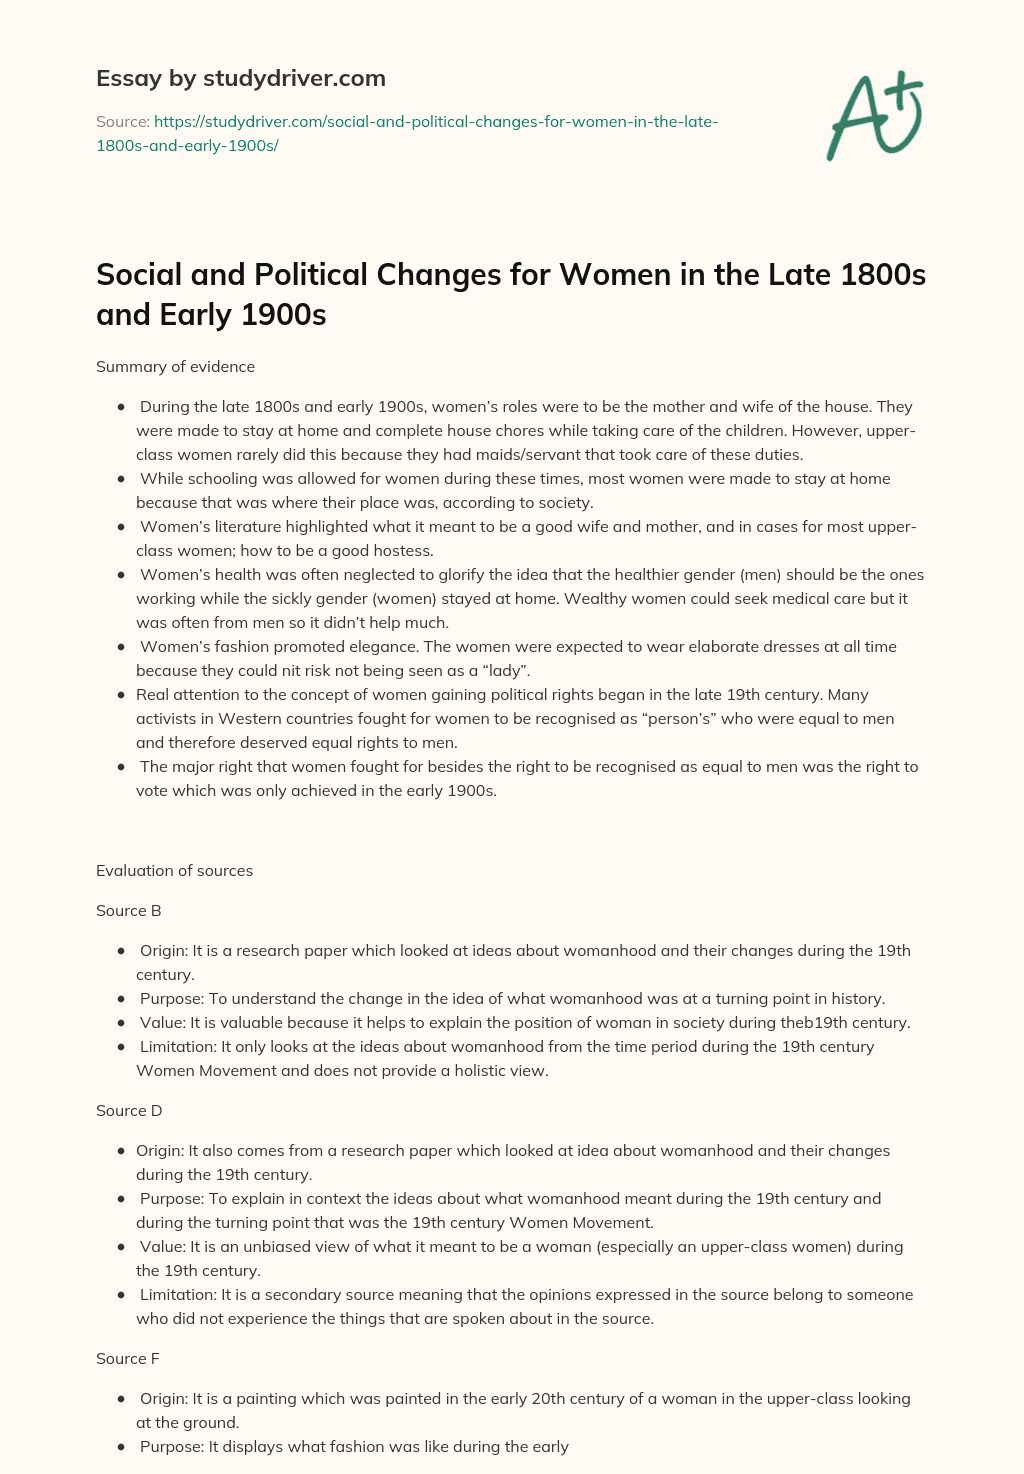 Social and Political Changes for Women in the Late 1800s and Early 1900s  essay